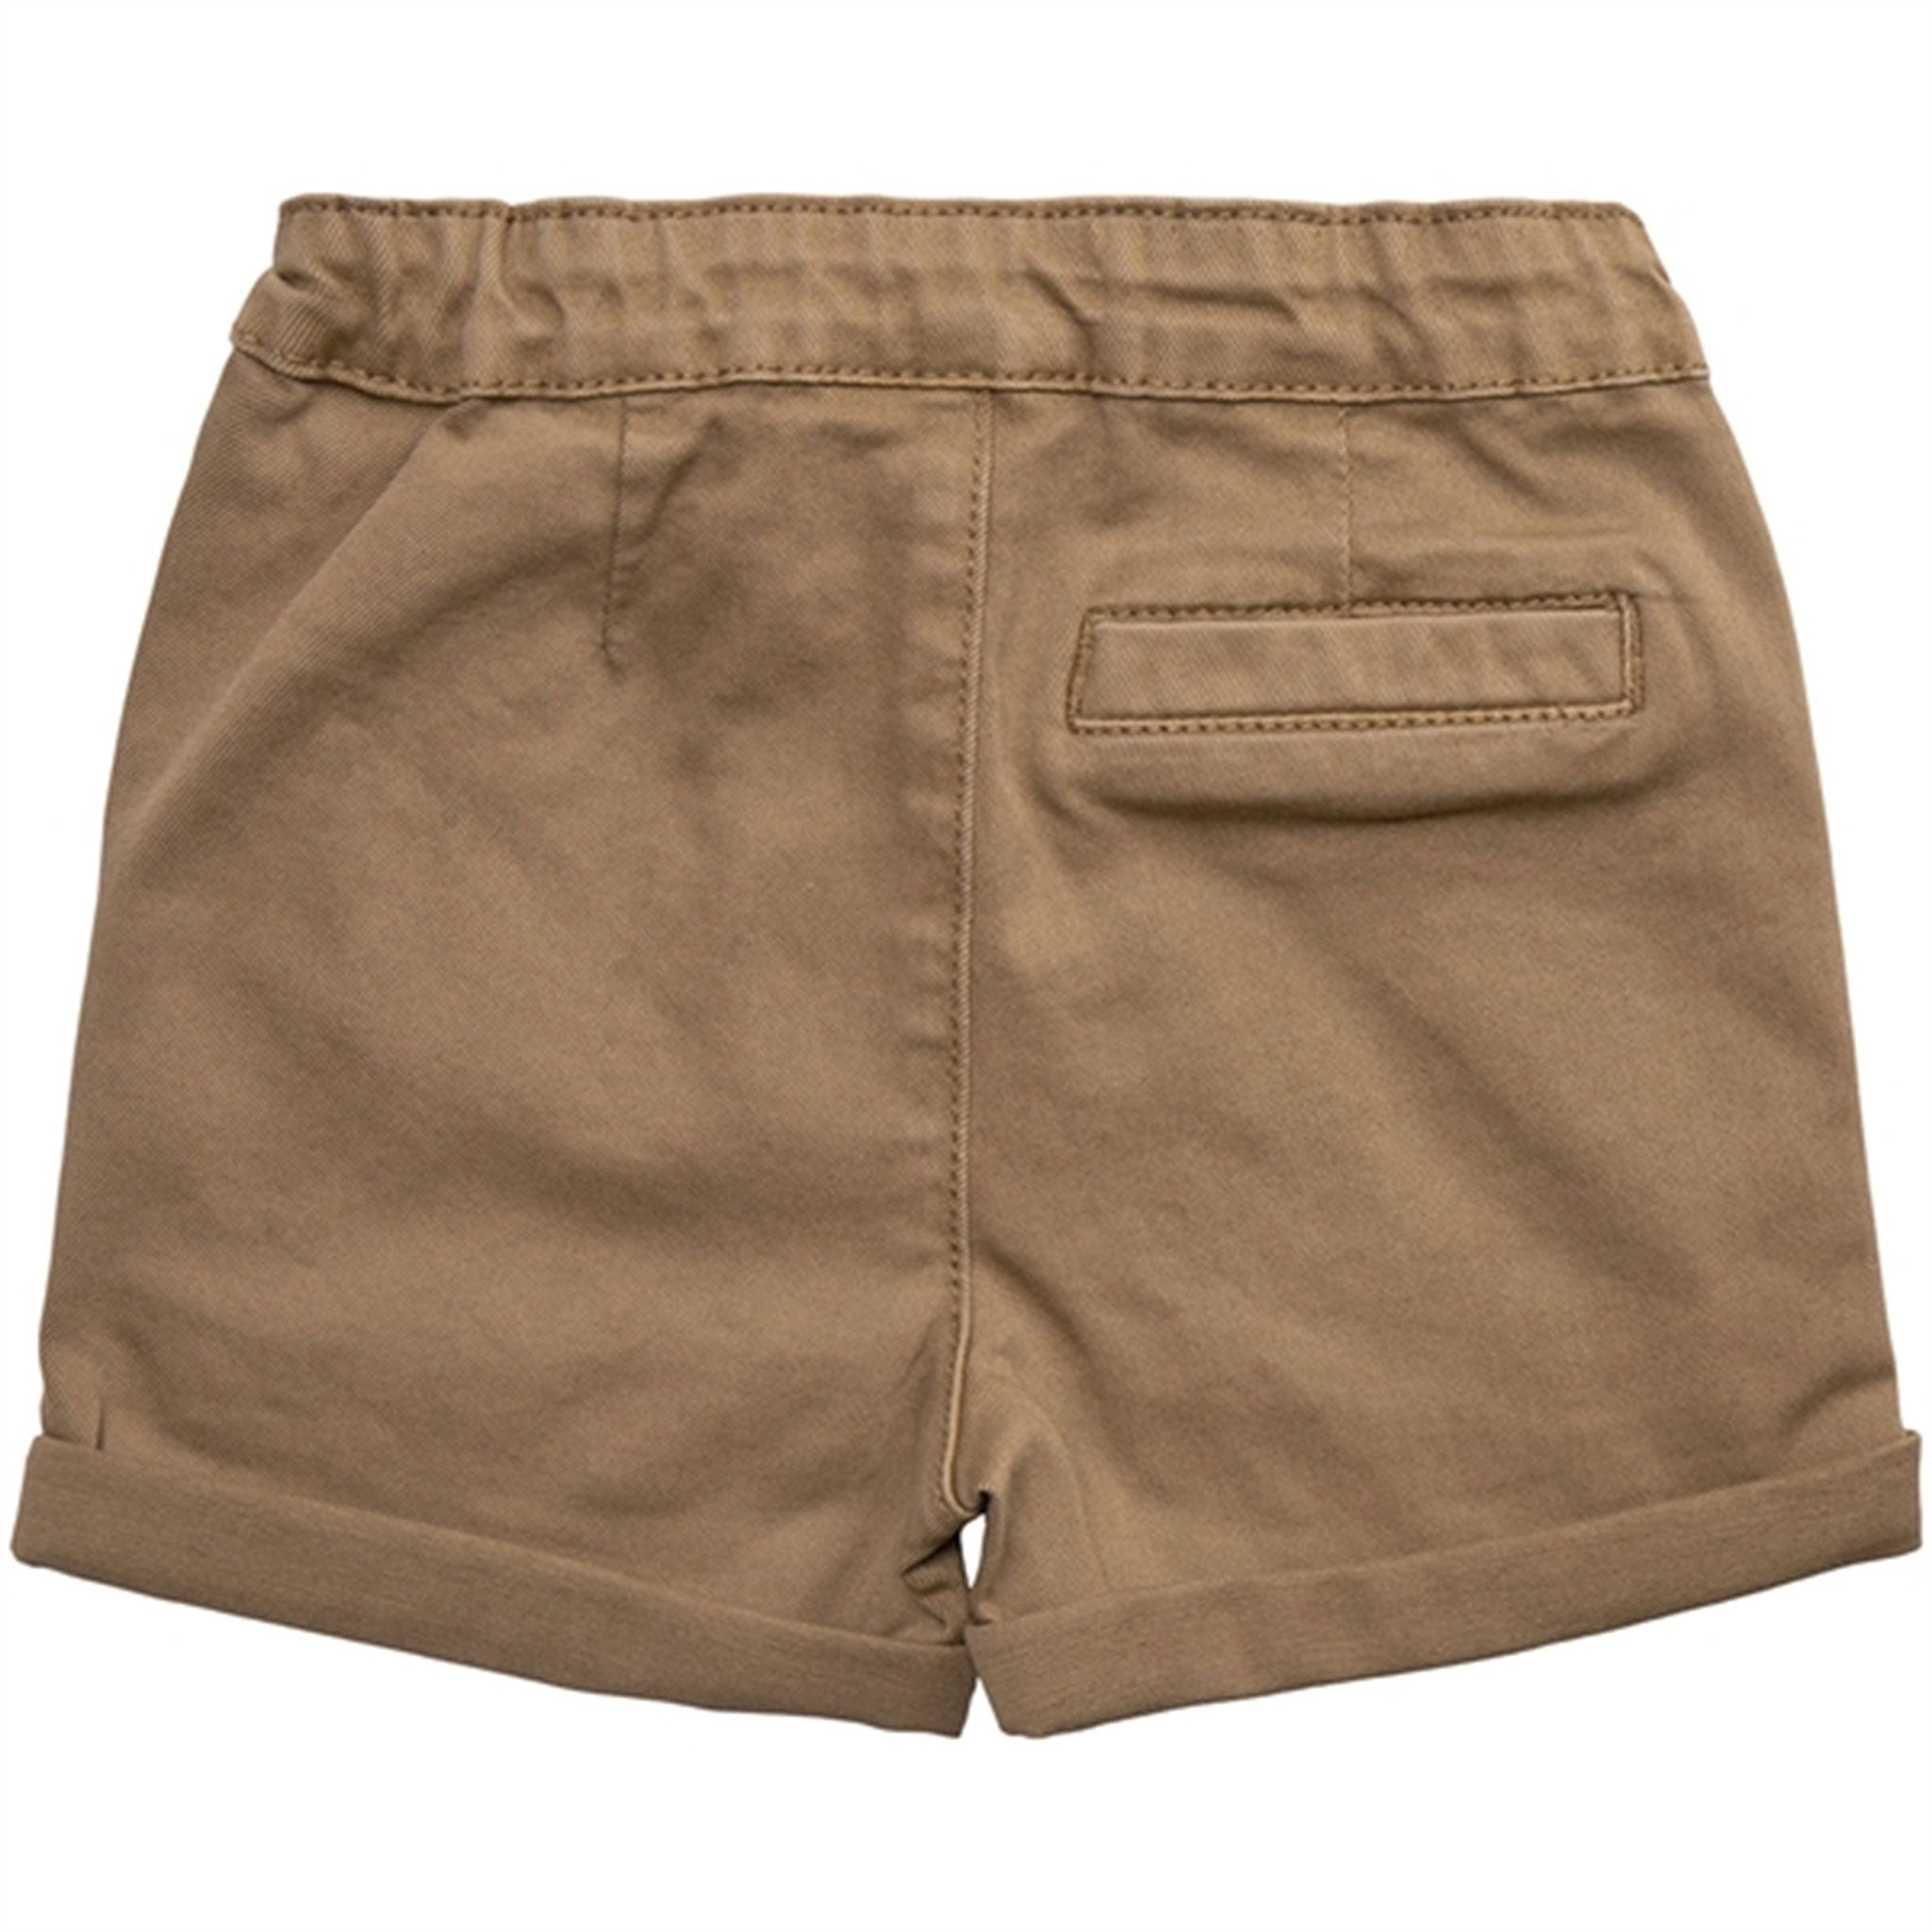 Petit by Sofie Schnoor Camel Shorts 3